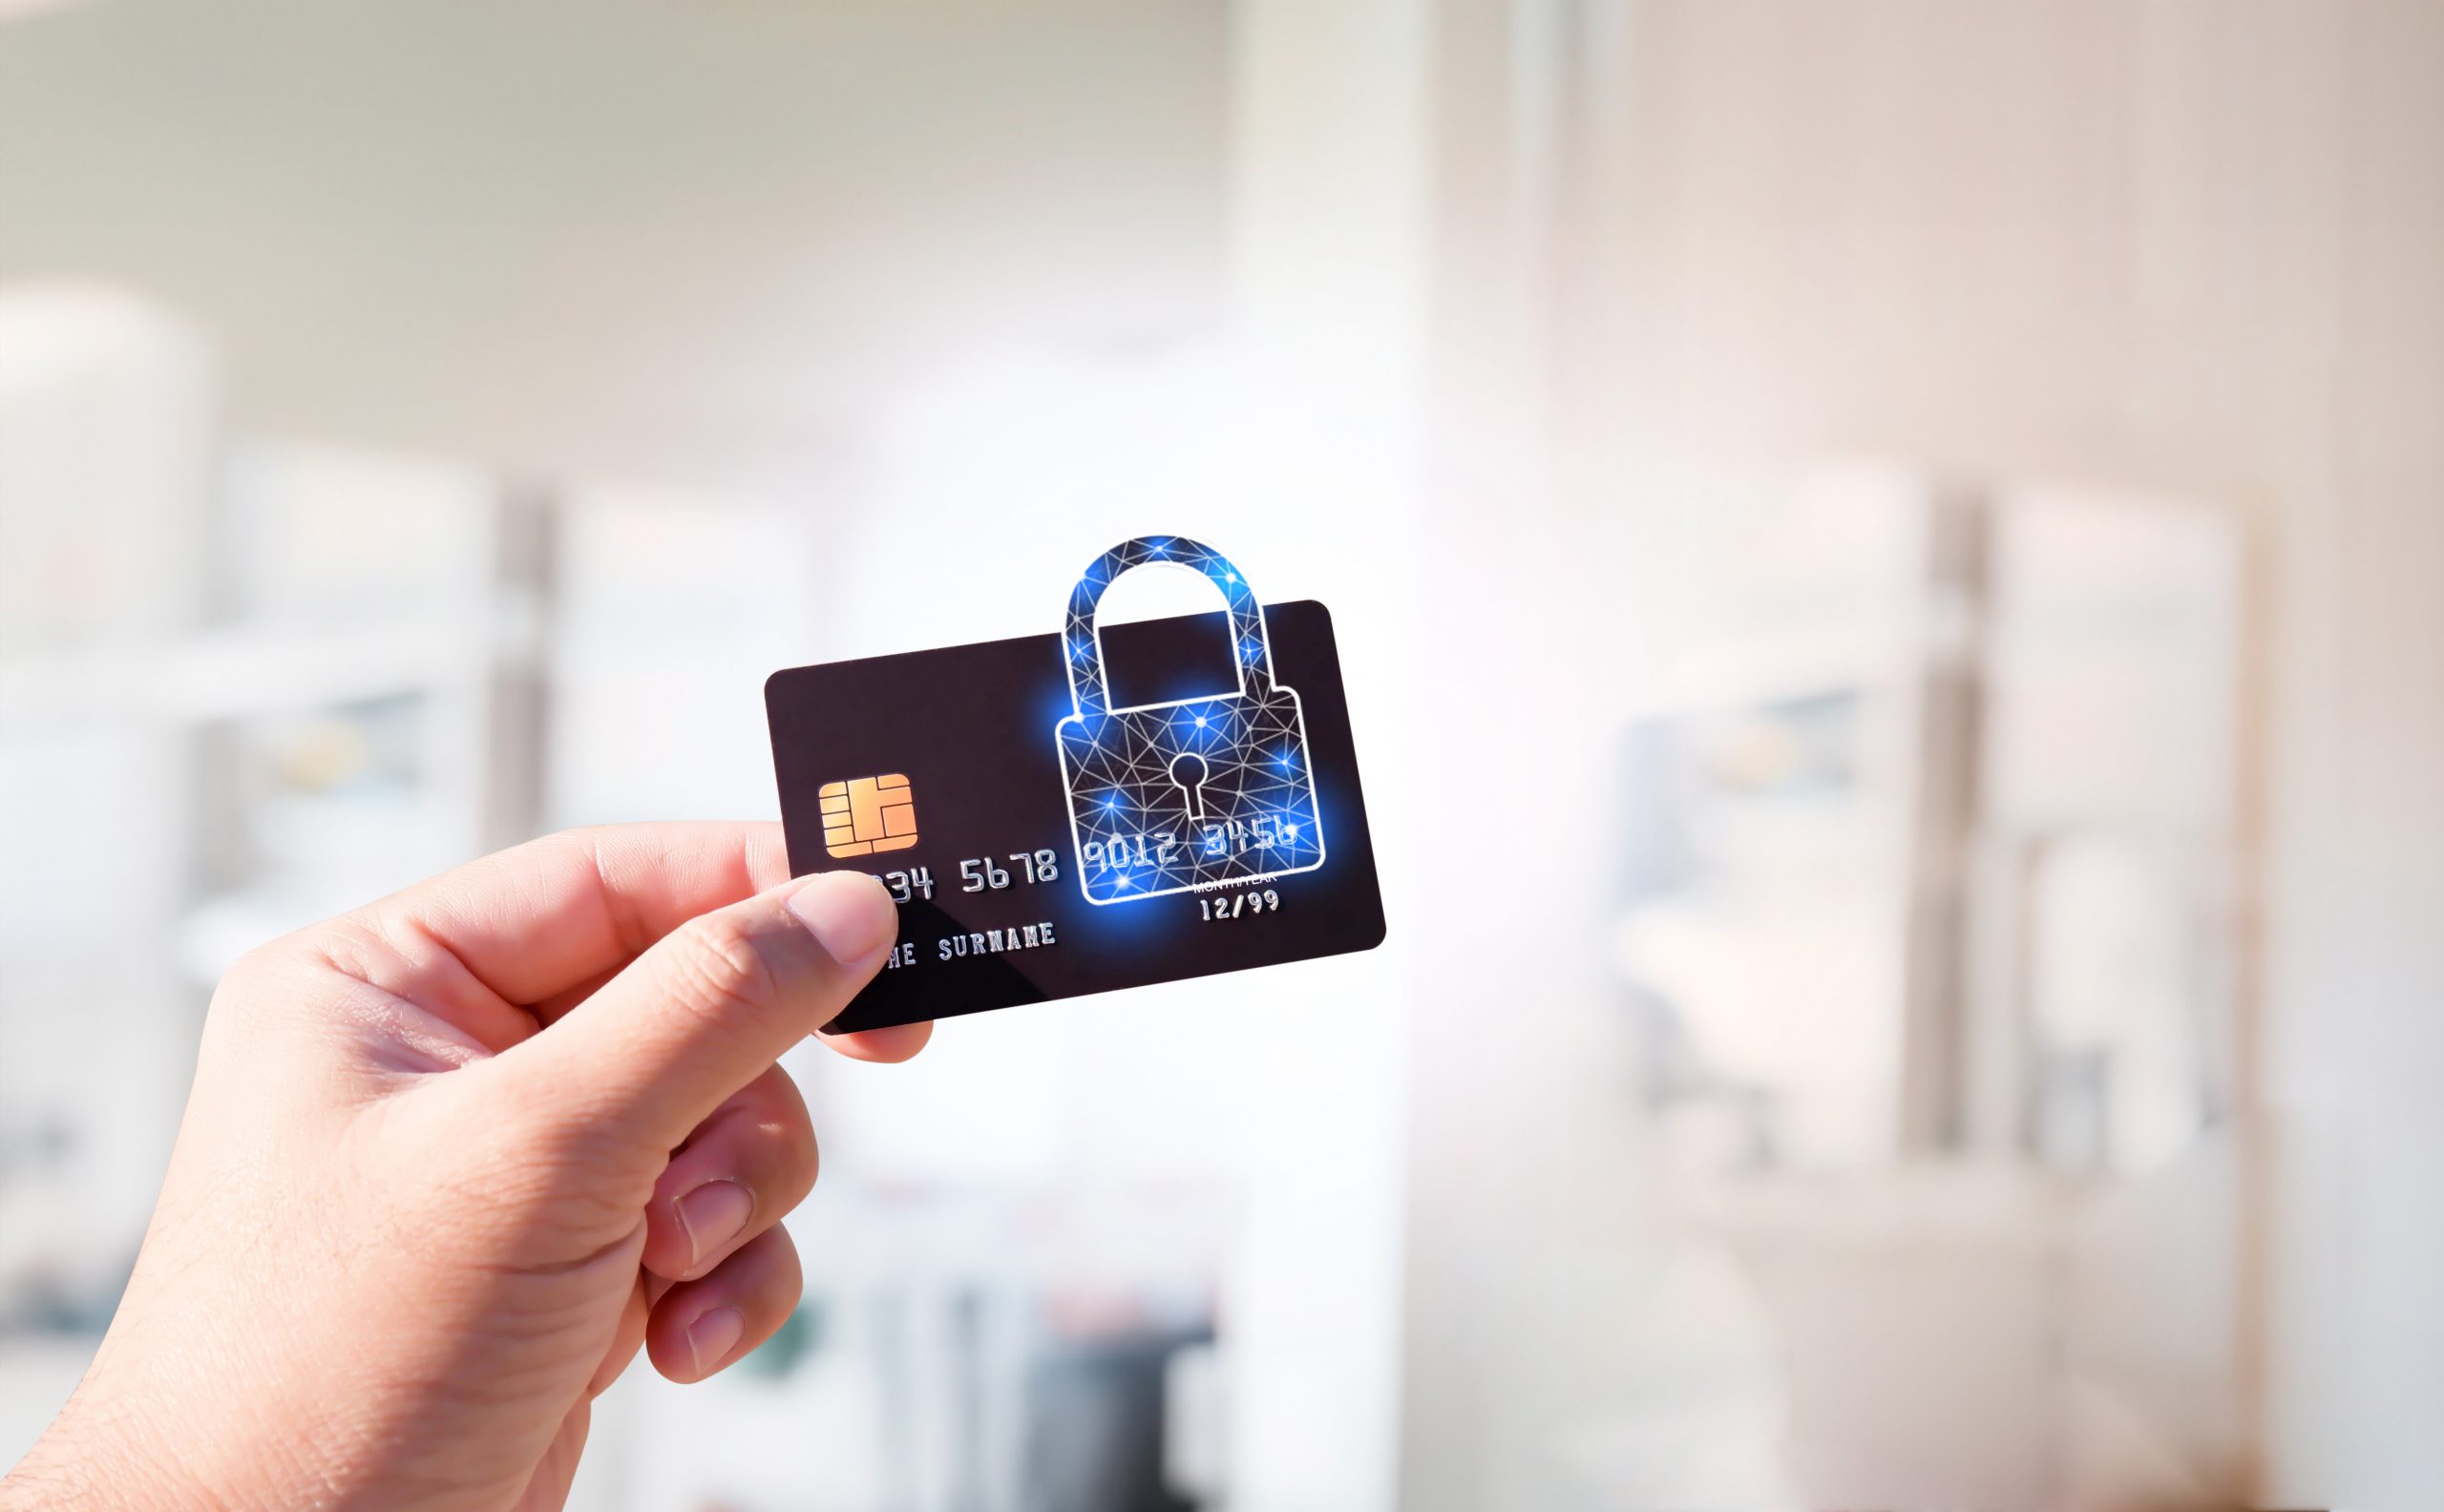 One of Biometric Payment Cards’ biggest advantages is enhanced security